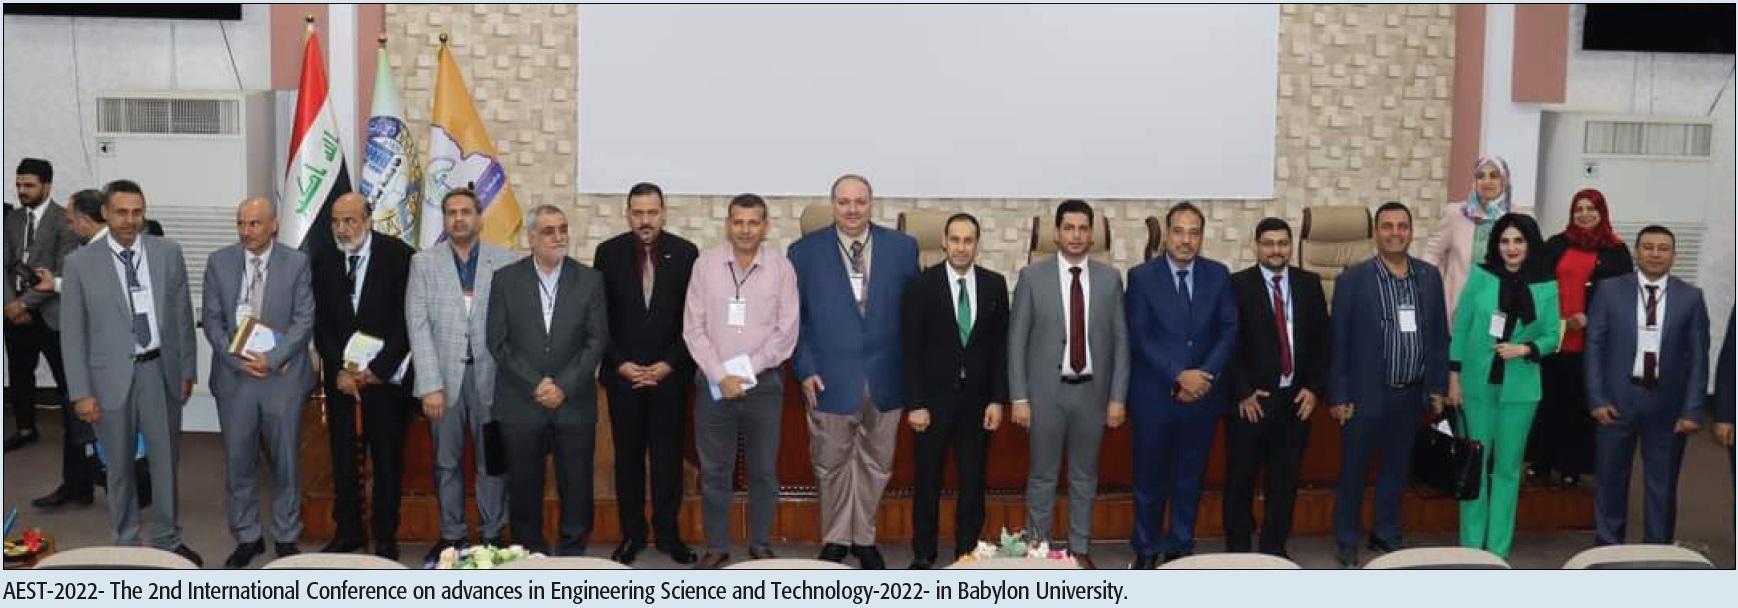 AEST-2022- The 2nd International Conference on advances in Engineering Science and Technology-2022- in Babylon University.